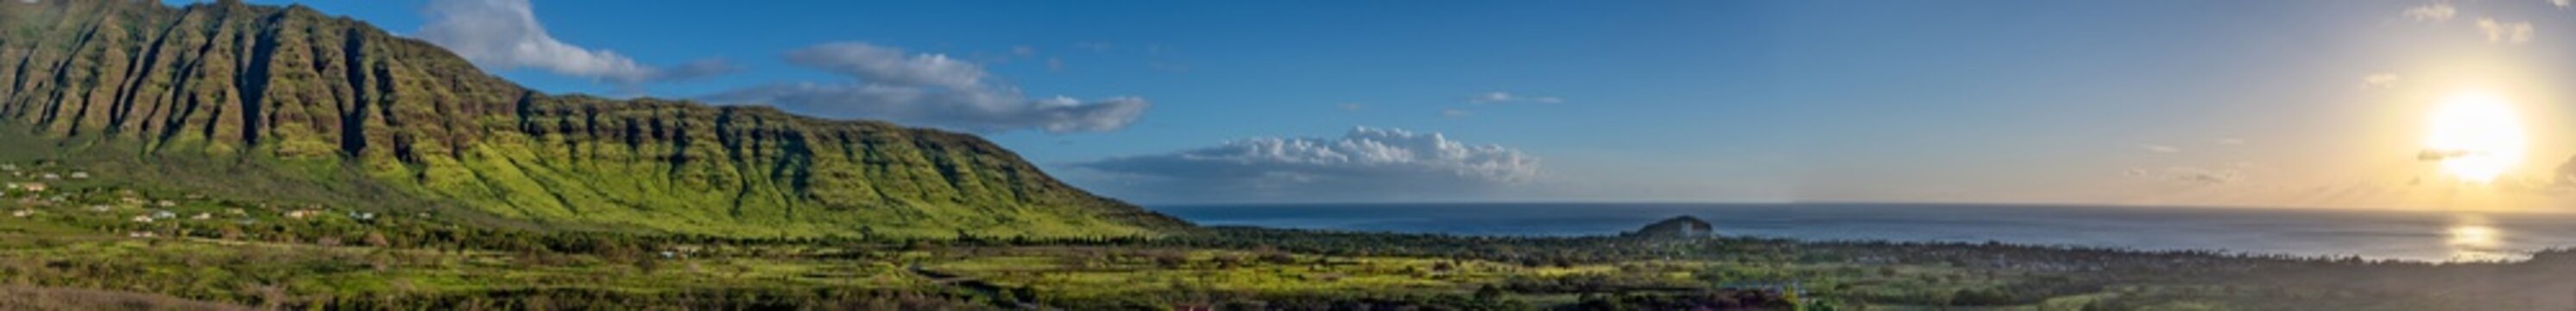 Panoramic view of Makaha valley on the west coast of Oahu